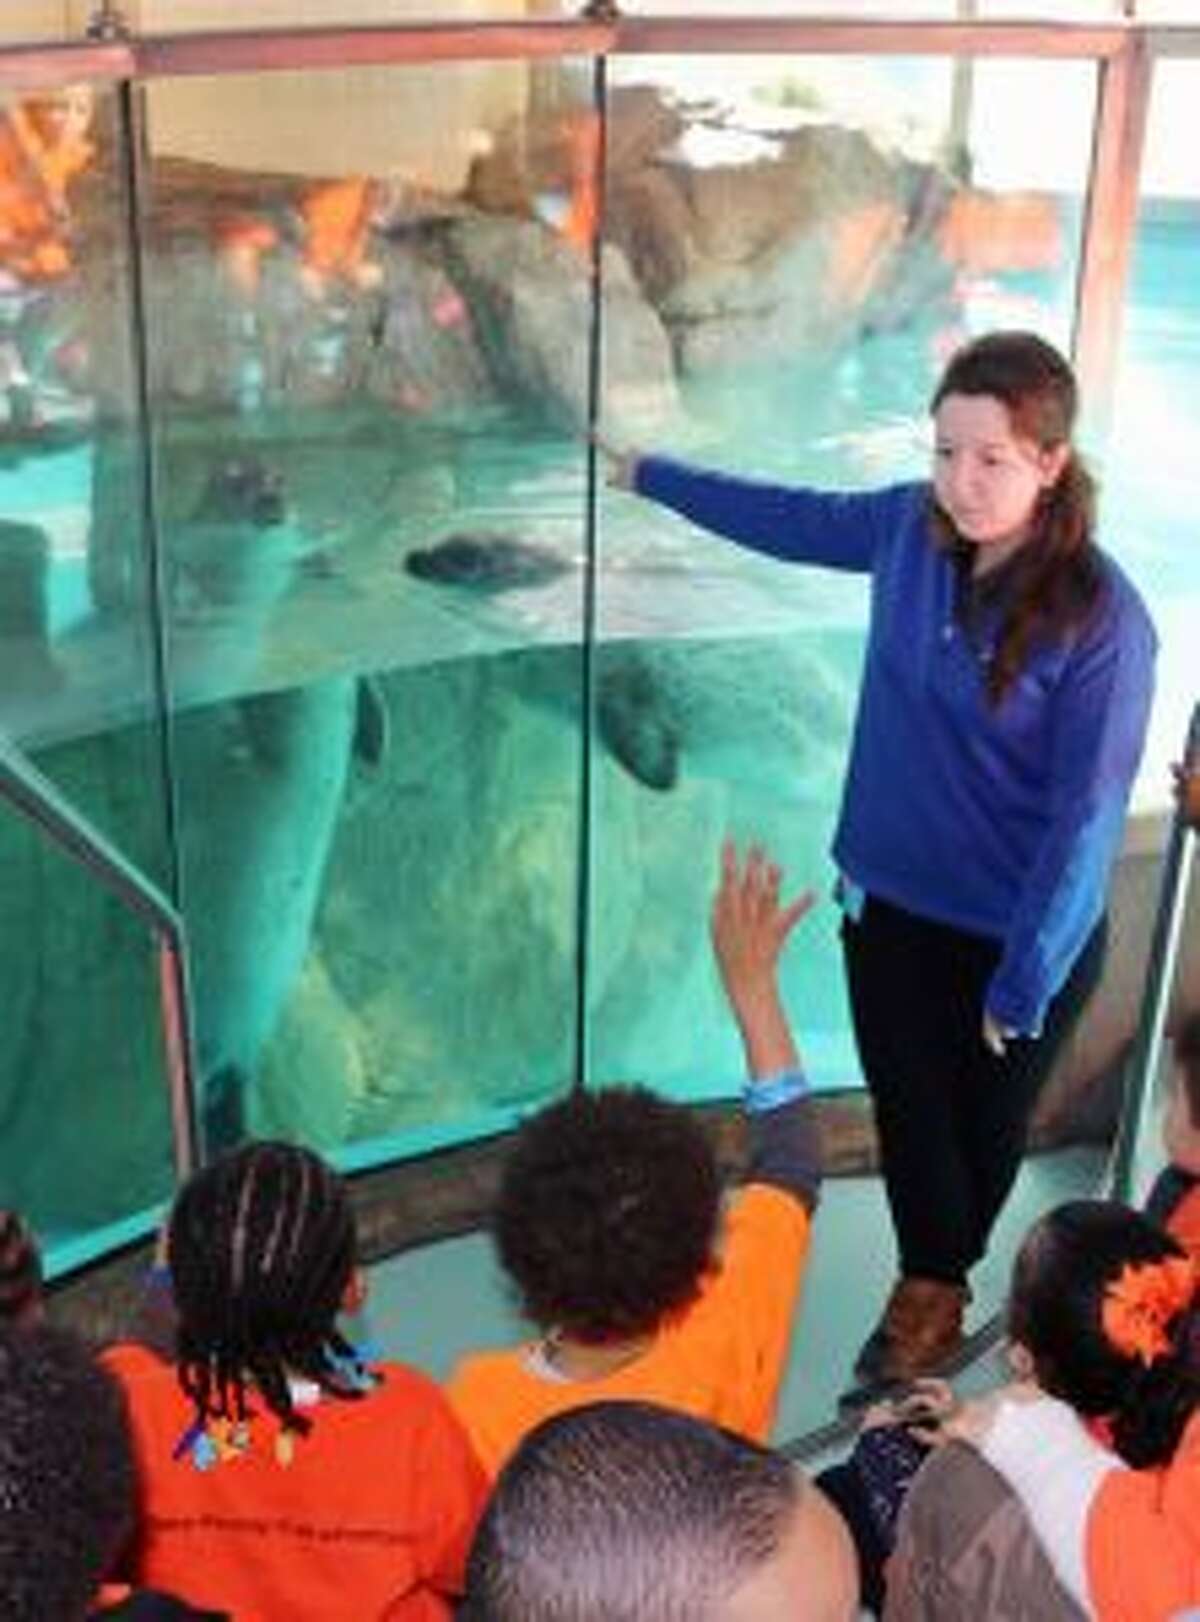 Maritime Aquarium educator Lauren Magliola directs observations about the harbor seals with young students during a school field trip.